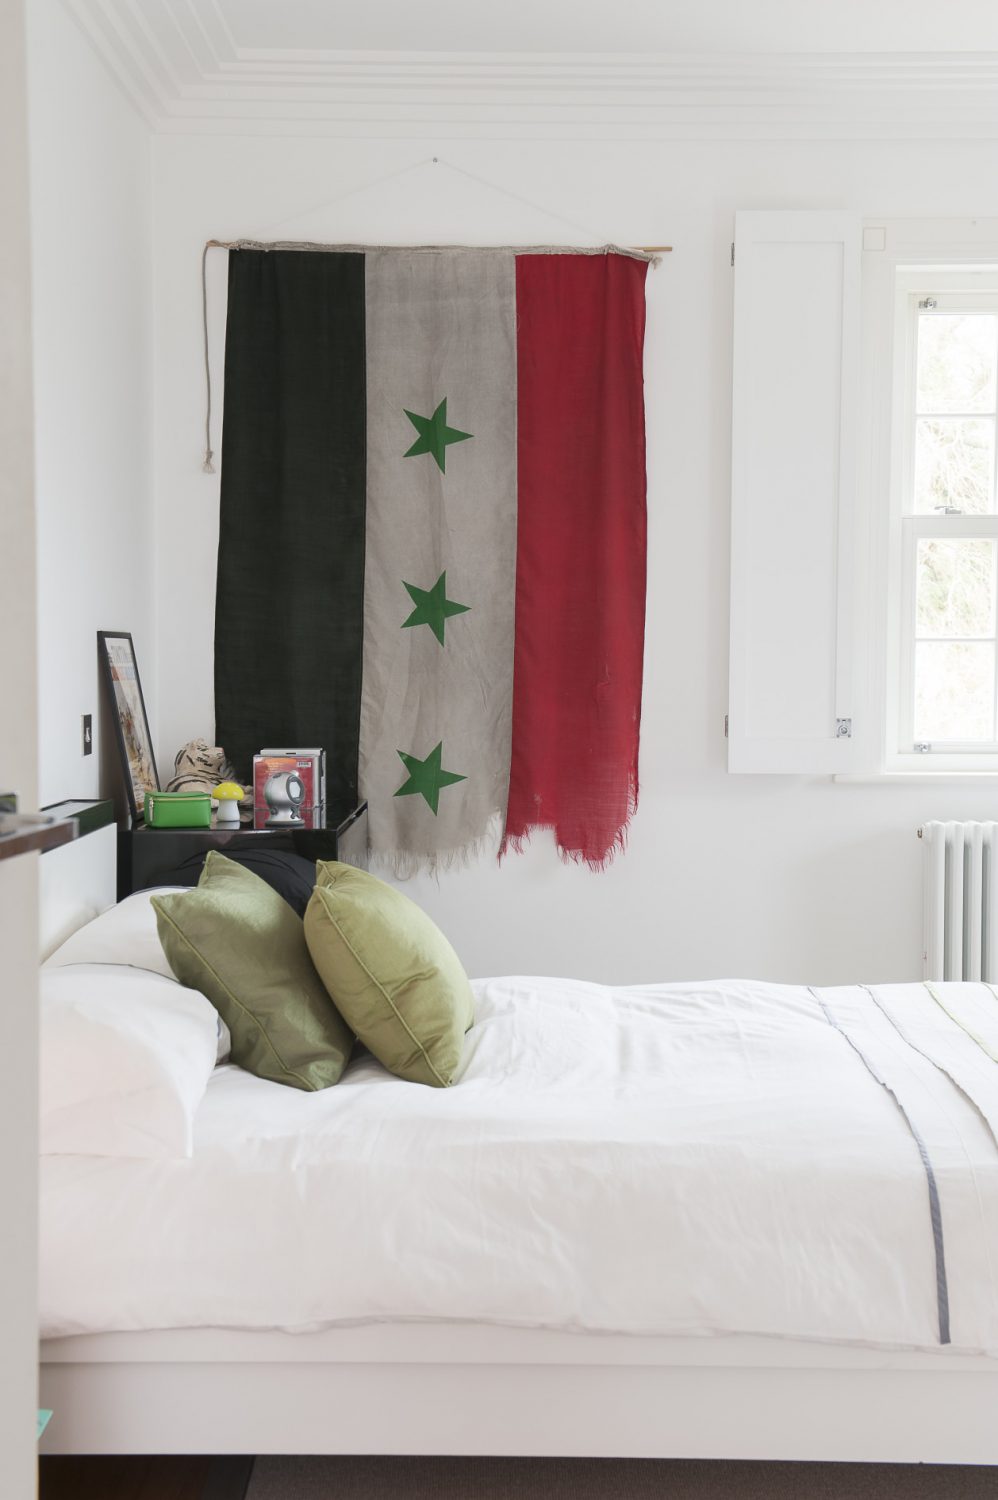 The couple’s three boys are also avid collectors of exotic artefacts, including this original Iraqi flag – on display in one of the boy’s bedrooms